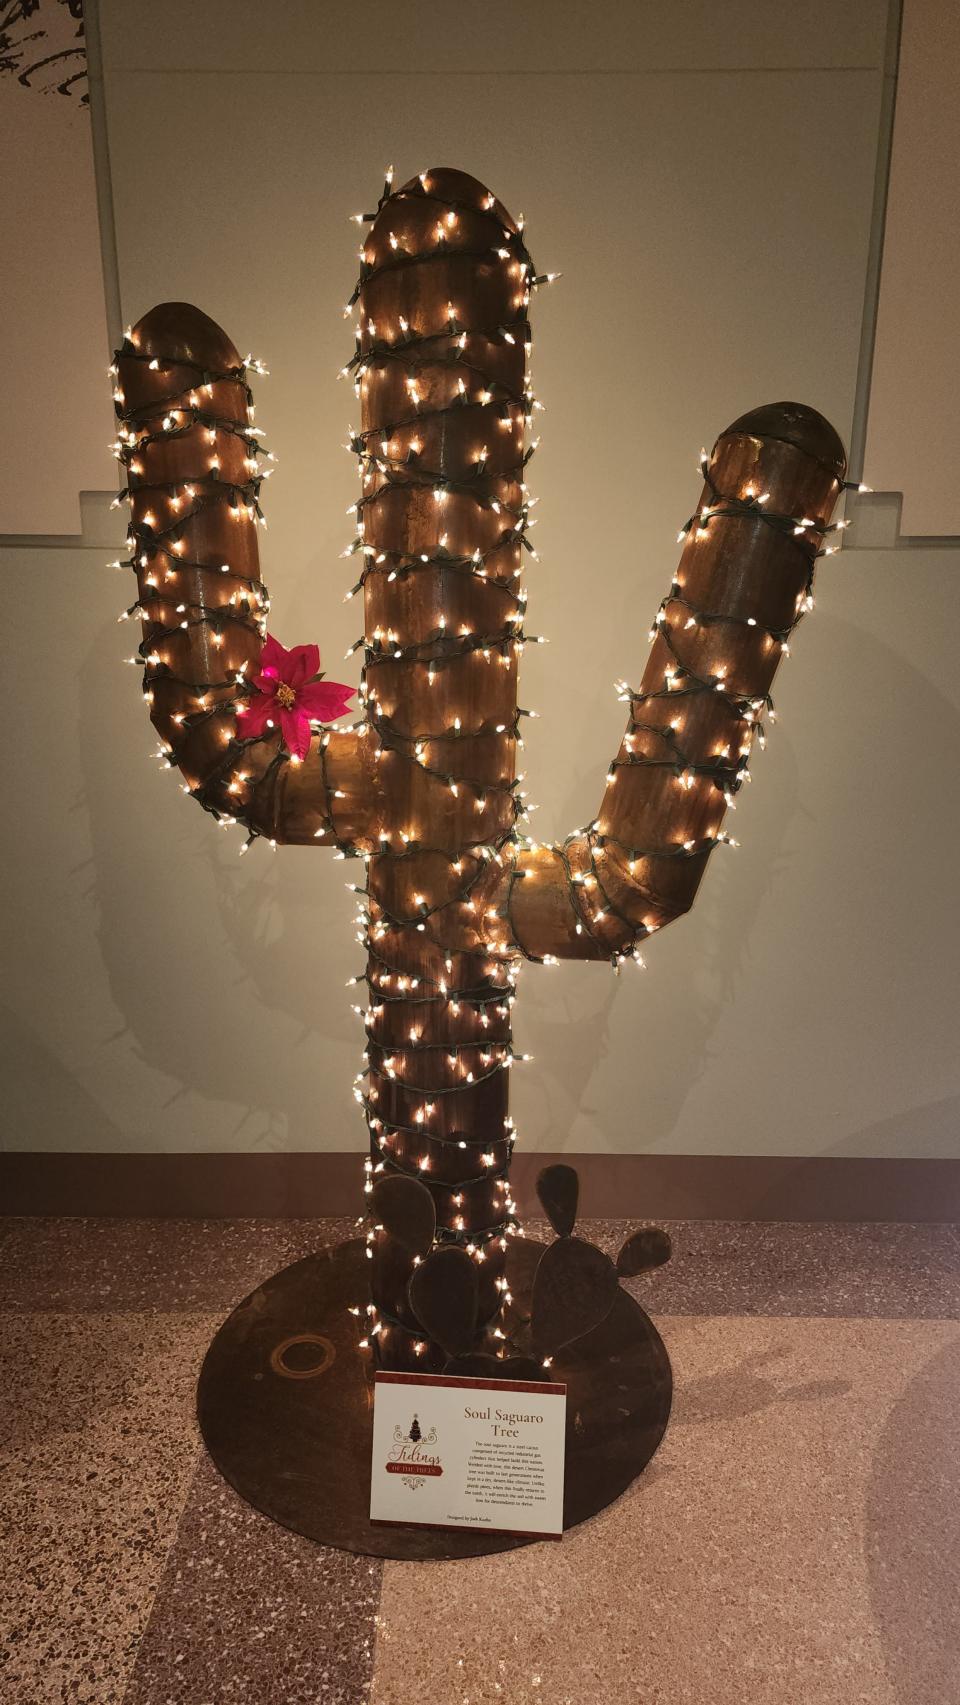 The Soul Saguaro Tree designed by John Kuen was among the many unique Christmas trees auctioned off at the "Tree of Tidings" fundraiser Thursday night at the Panhandle-Plains Historical Museum in Canyon.